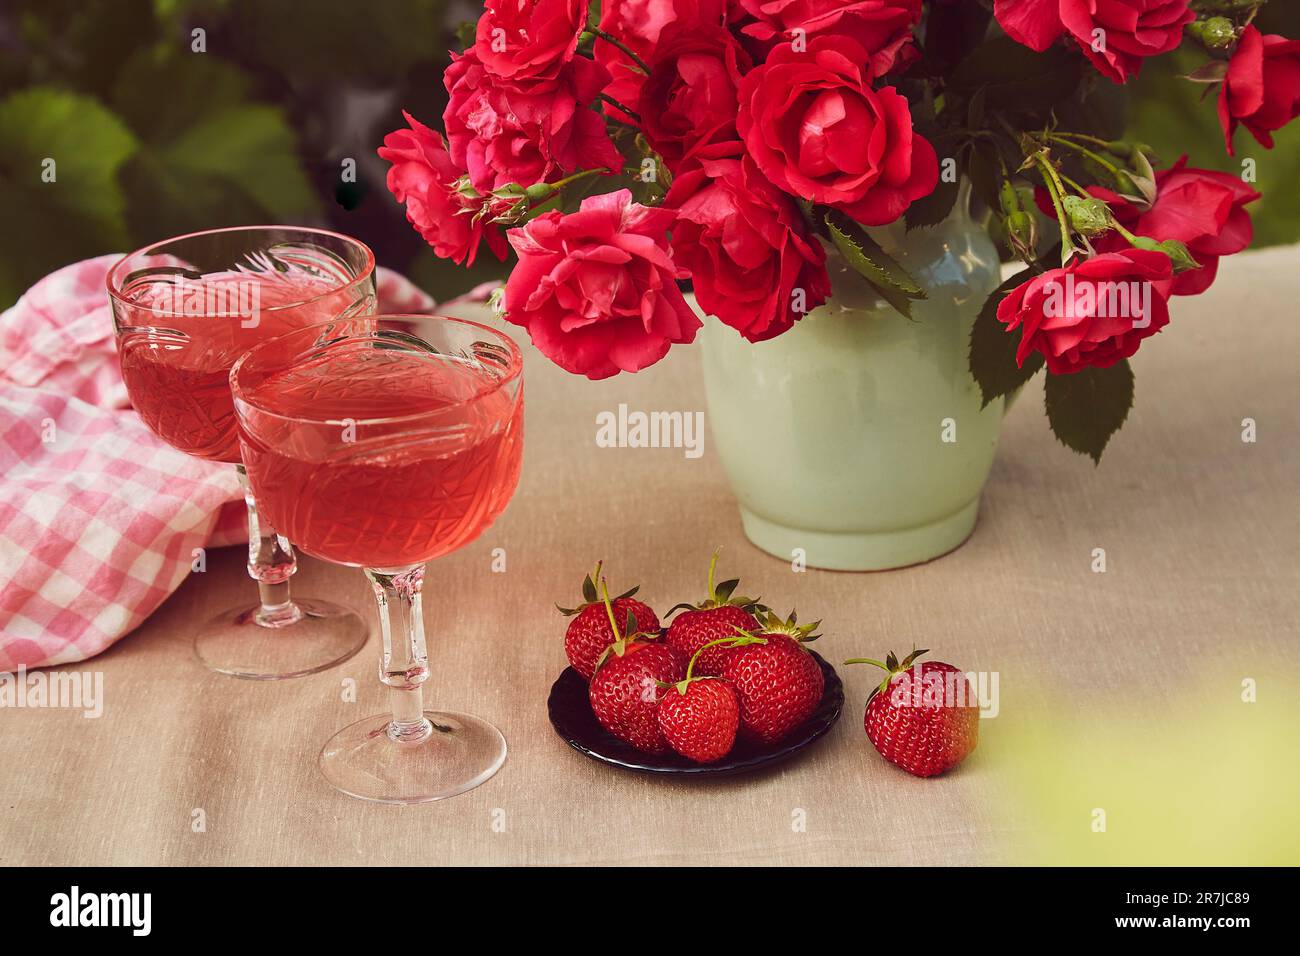 Couple glasses of red sparkling strawberry wine with roses outdoor, strawberry and chocolate. Aesthetic summer table settings Stock Photo